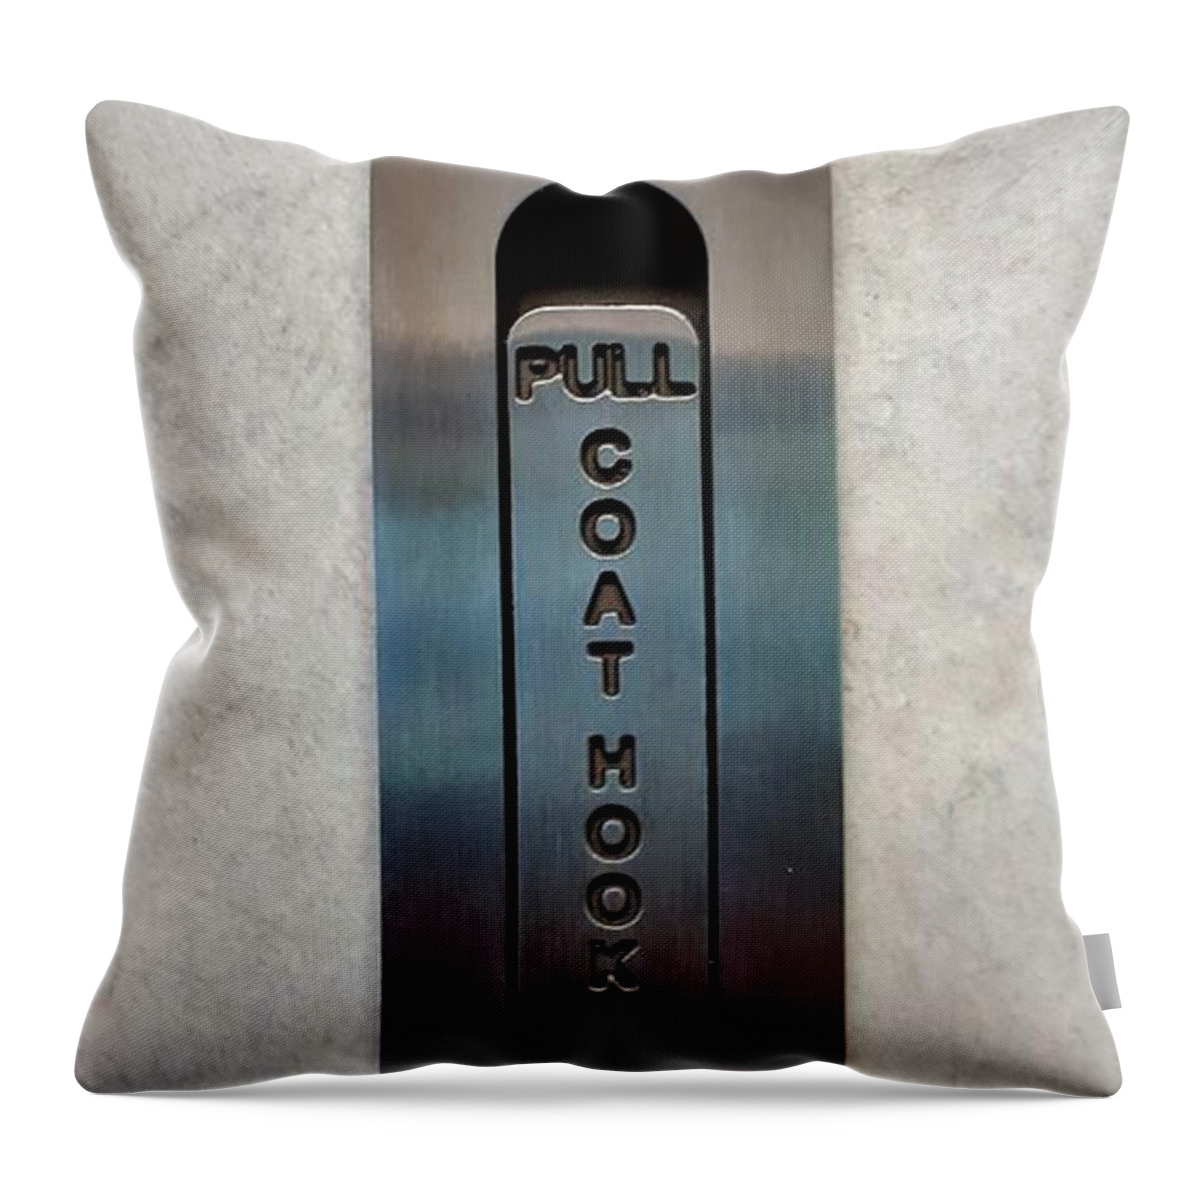 Coats Throw Pillow featuring the photograph Coat Hook by Rob Hans